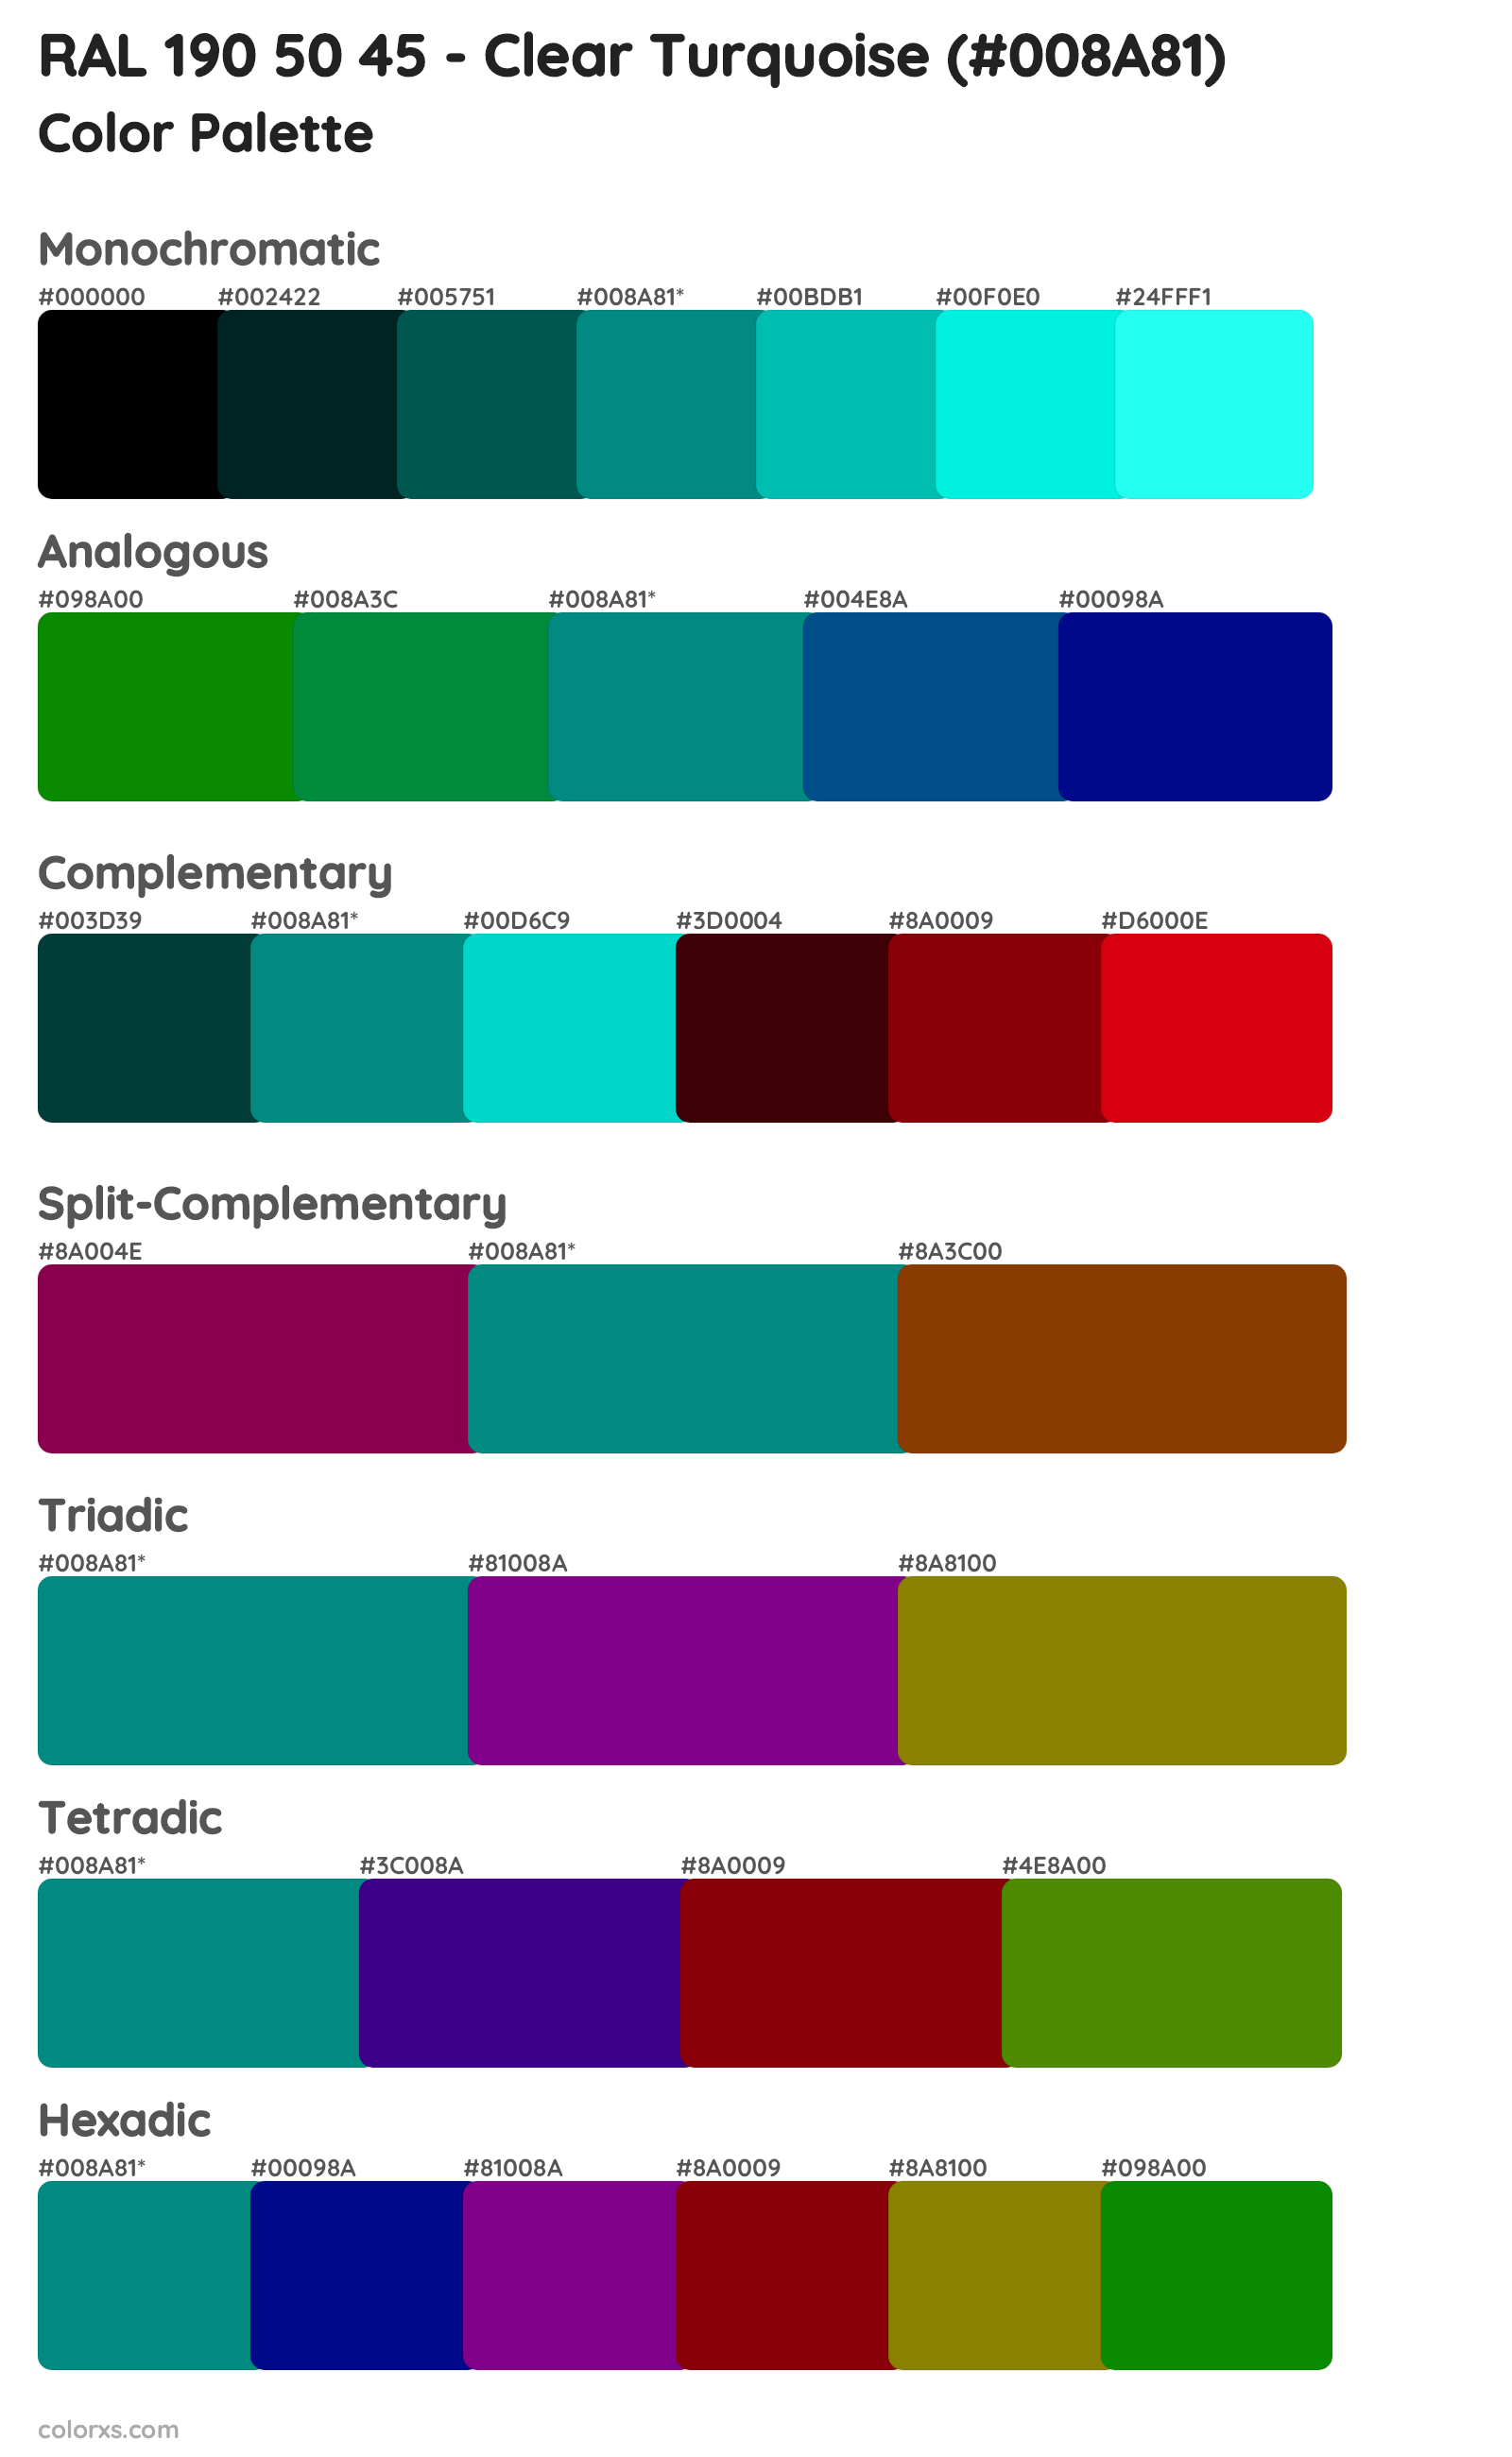 RAL 190 50 45 - Clear Turquoise Color Scheme Palettes